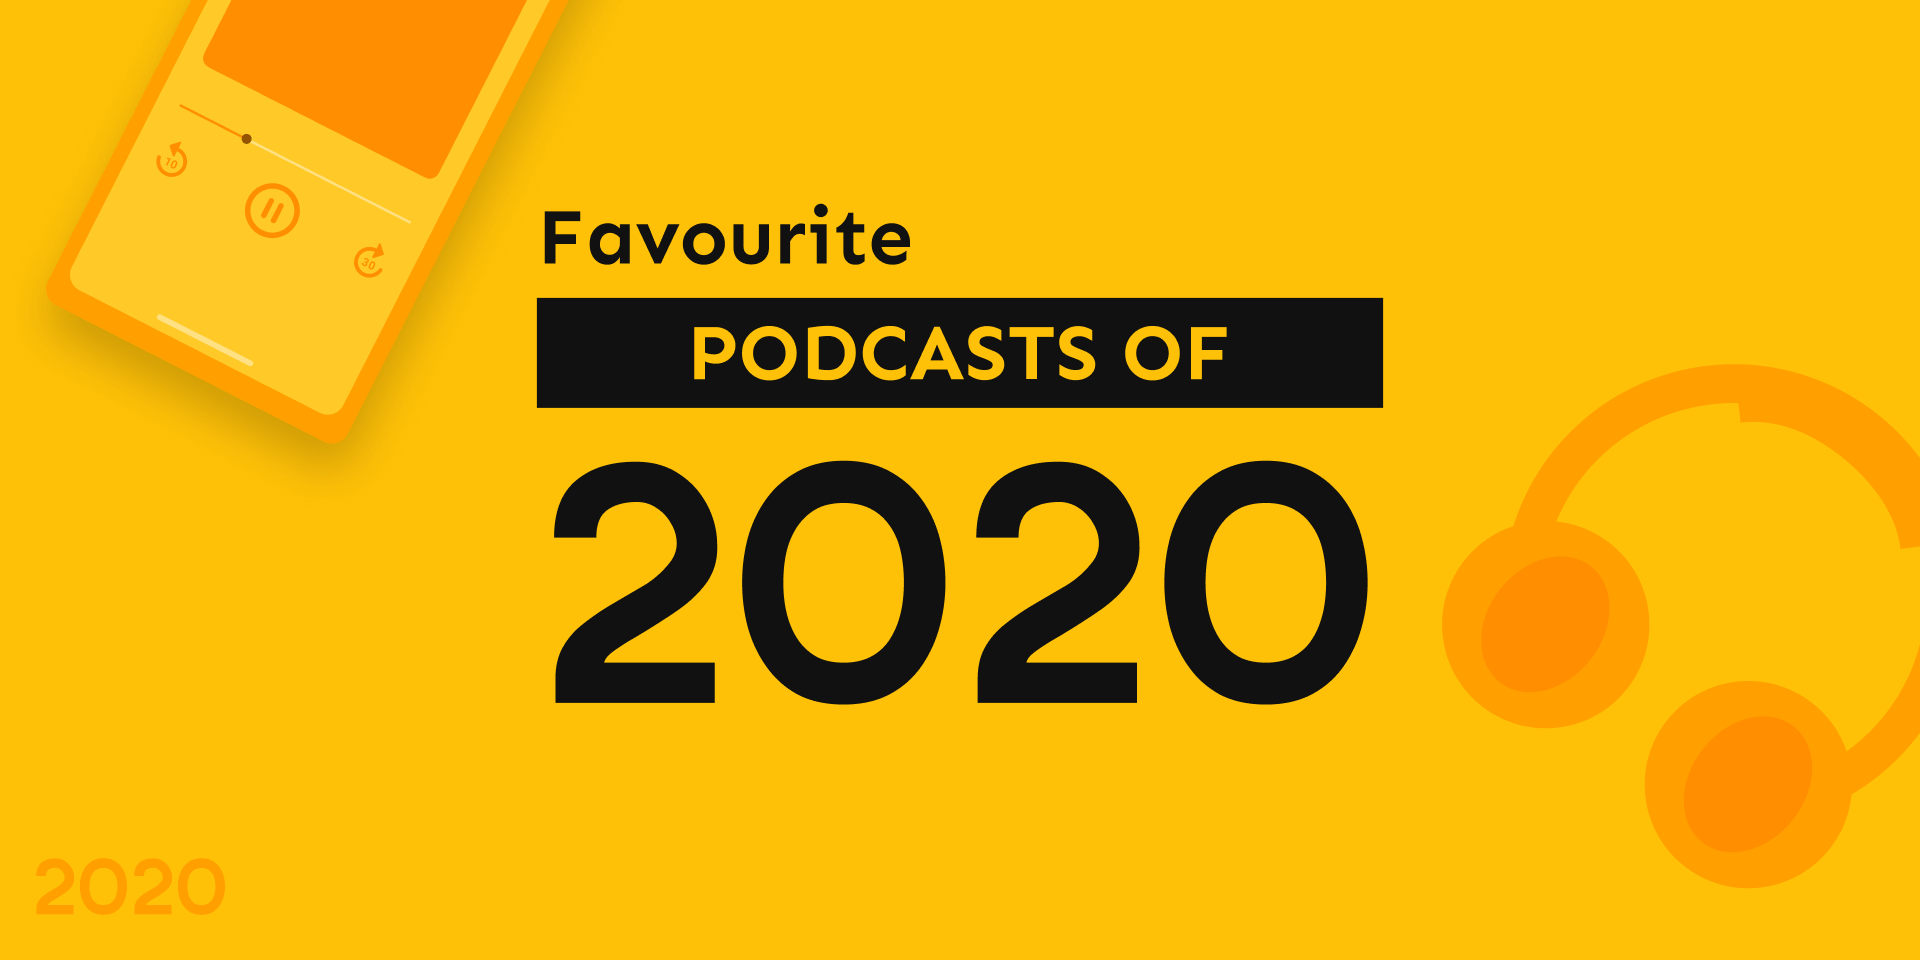 Favourite Podcasts of 2020